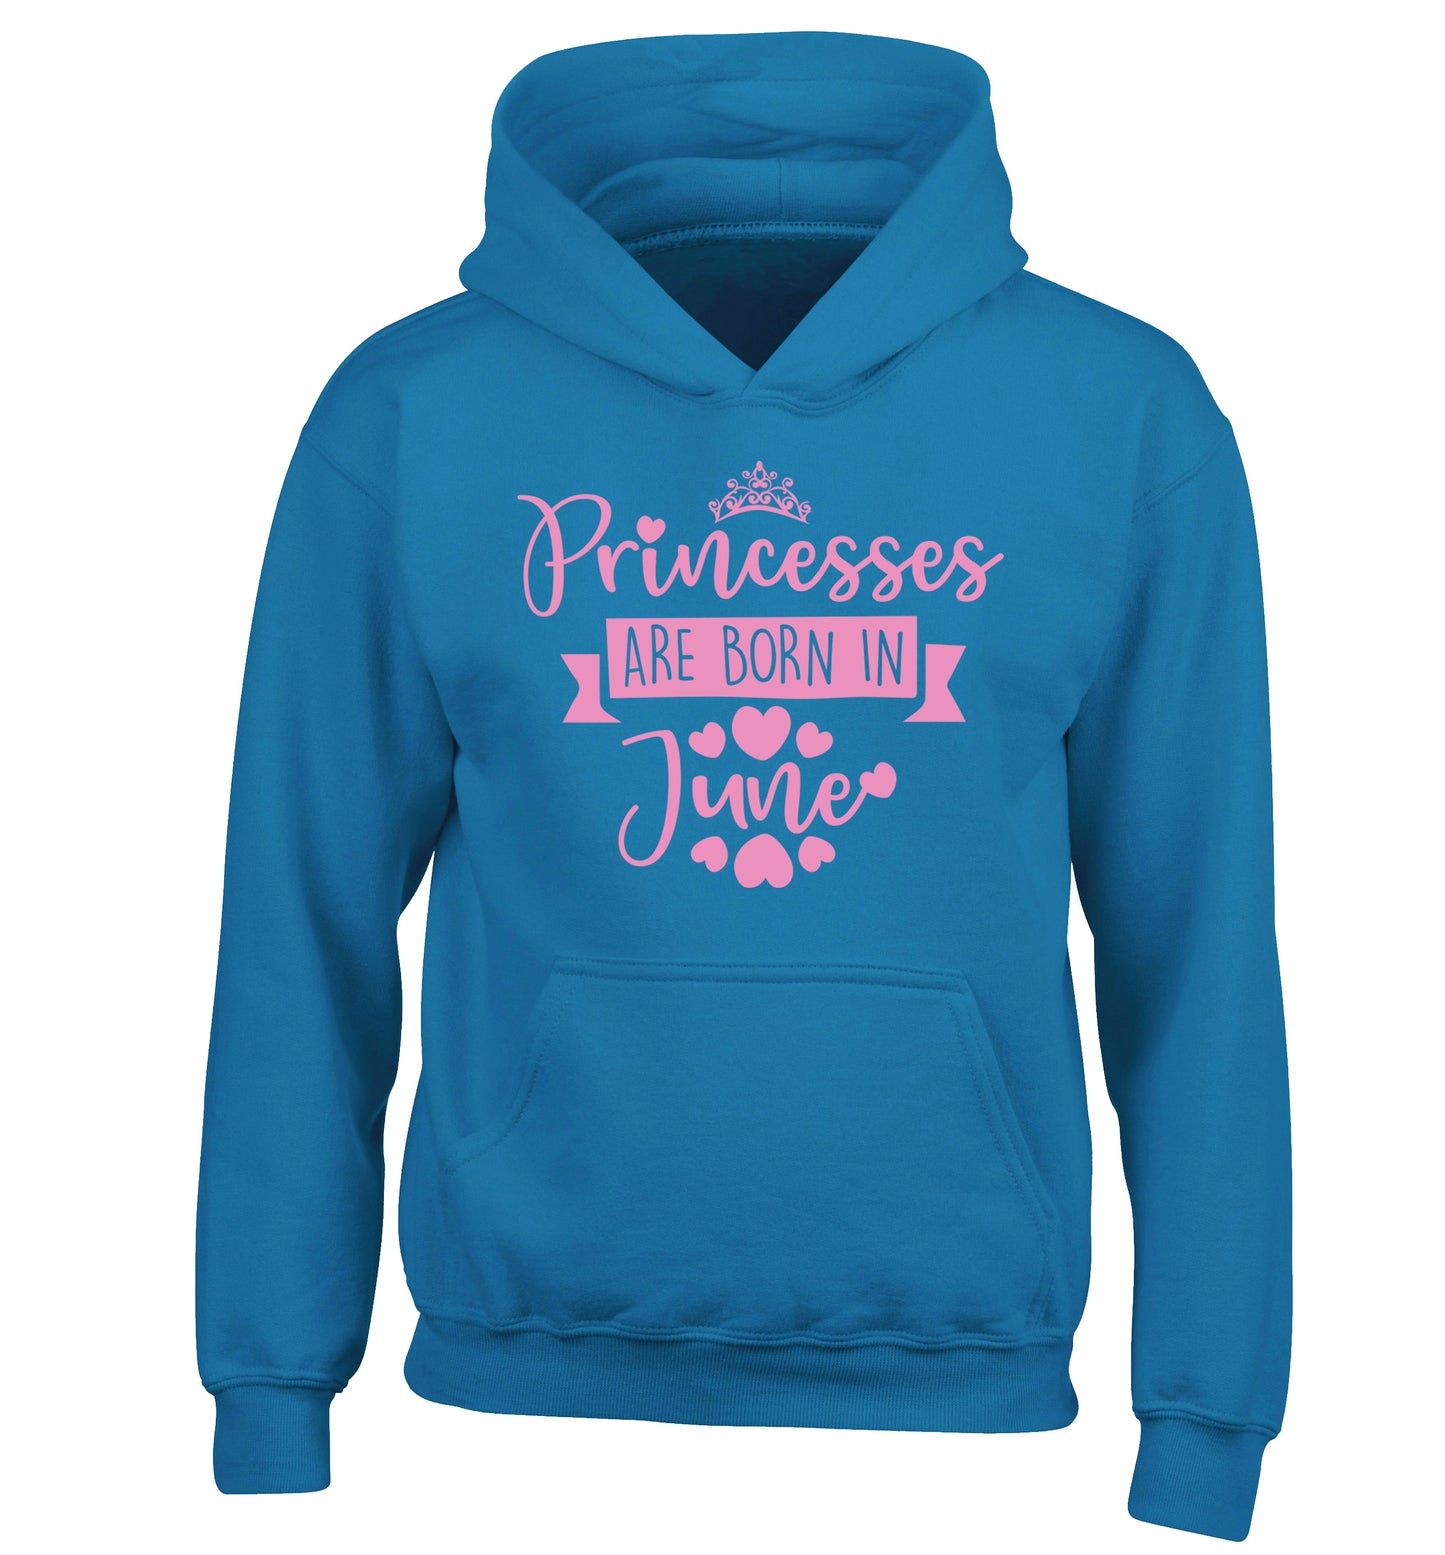 Princesses are born in June children's blue hoodie 12-13 Years